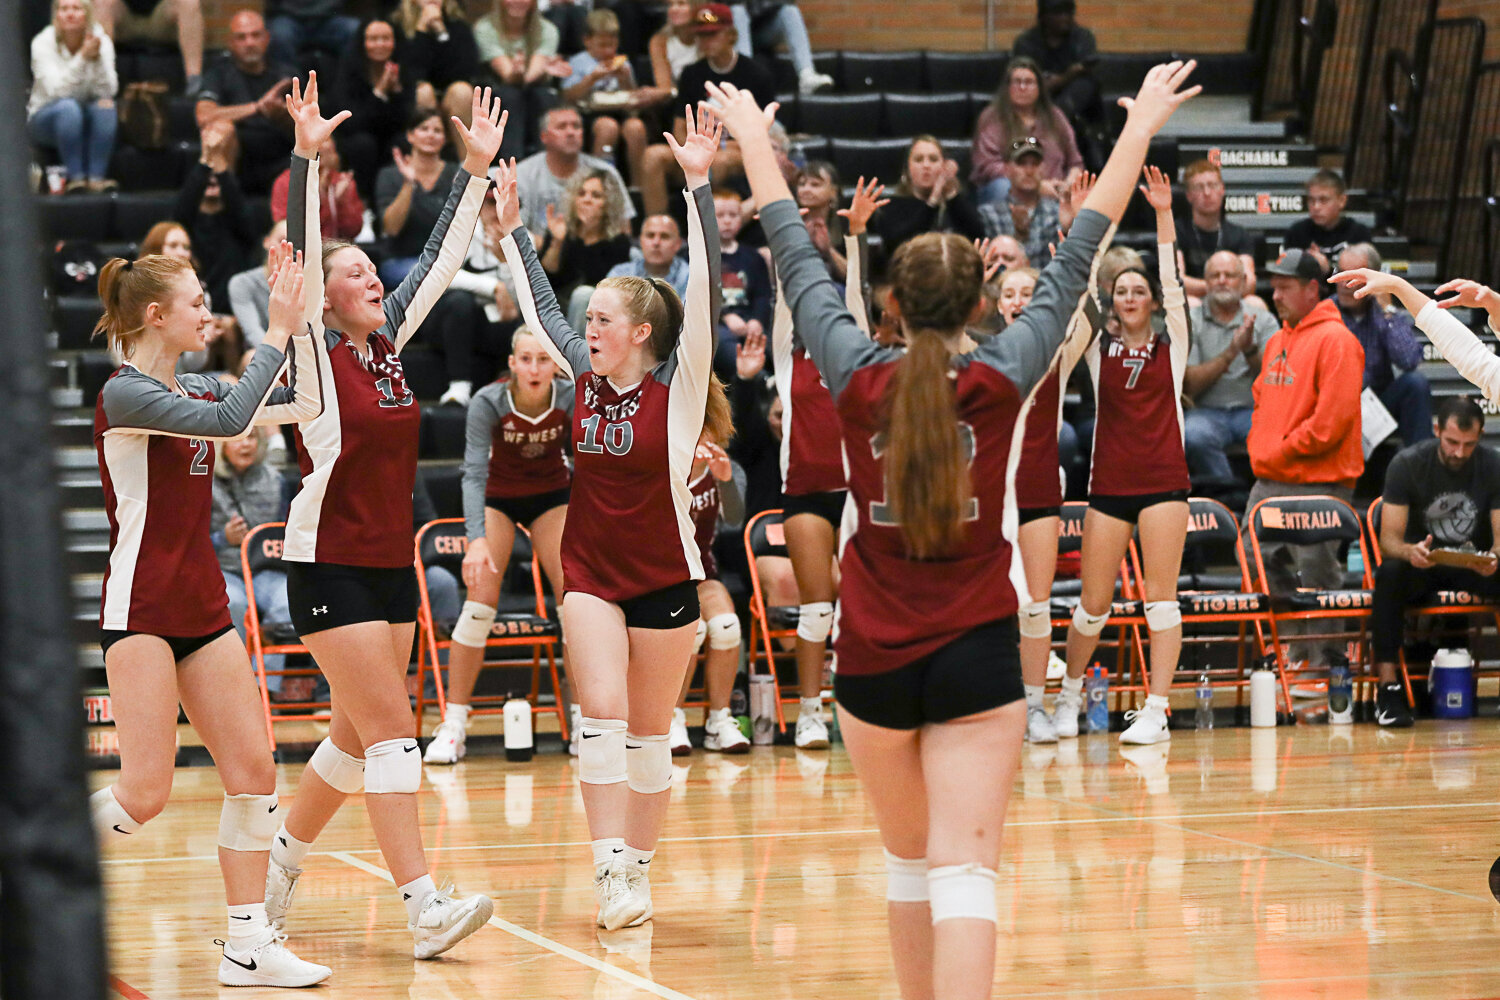 W.F. West celebrates a block during the first set of its three-set loss to Centralia on Sept. 21.